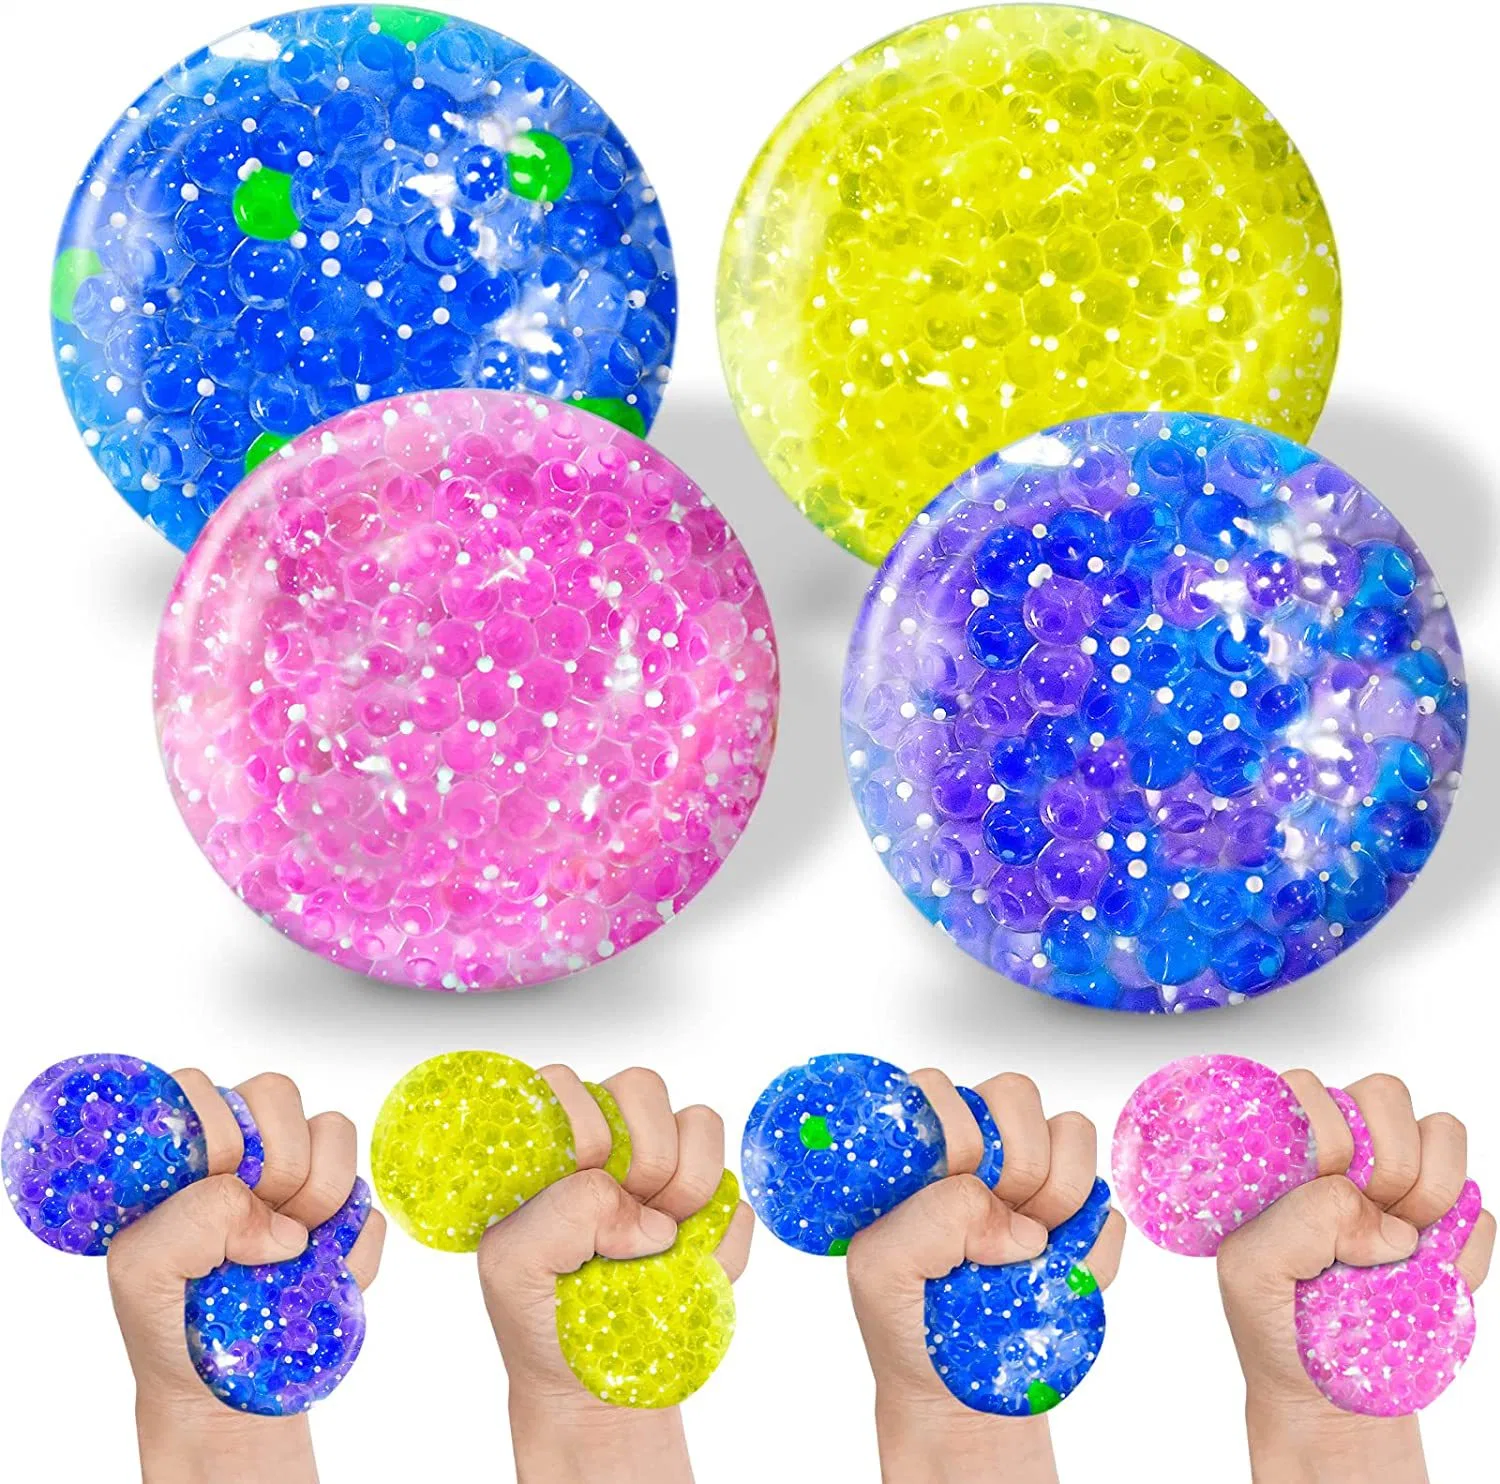 Wholesale/Supplier Promotional Finger Hand Squeeze Ball Splat Ball Fidget Toy Mesh Squeeze Ball for Kids Gifts